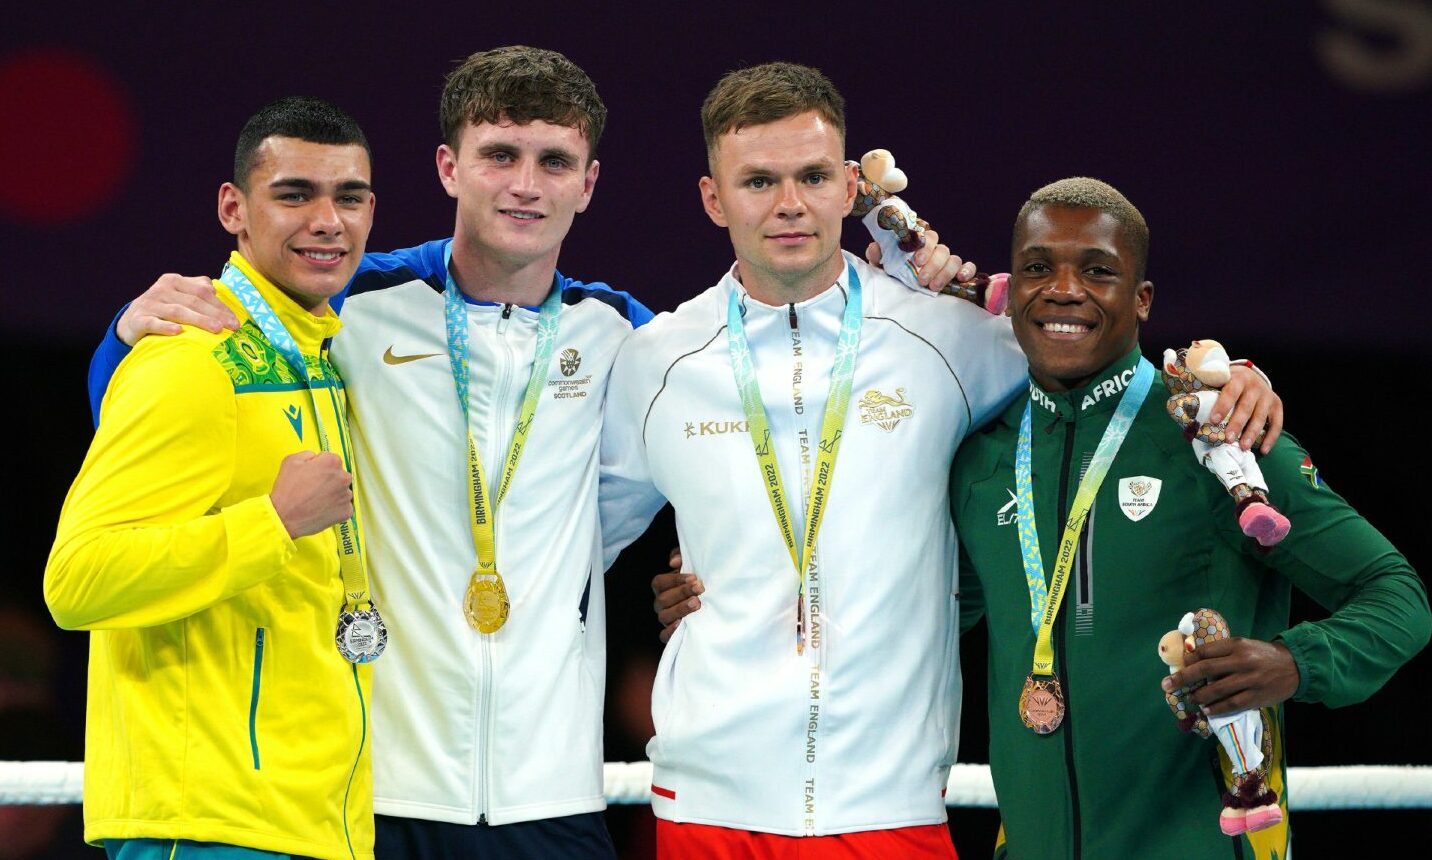 Australia's Callum Peters, Silver, Scotland's Sam Hickey wins Gold, Englands Lewis Richardson, Bronze, and South Africa's Simnikiwi Bongco, bronze in the Men's Middle (71-75kg) Final at The NEC on day ten of the 2022 Commonwealth Games in Birmingham.